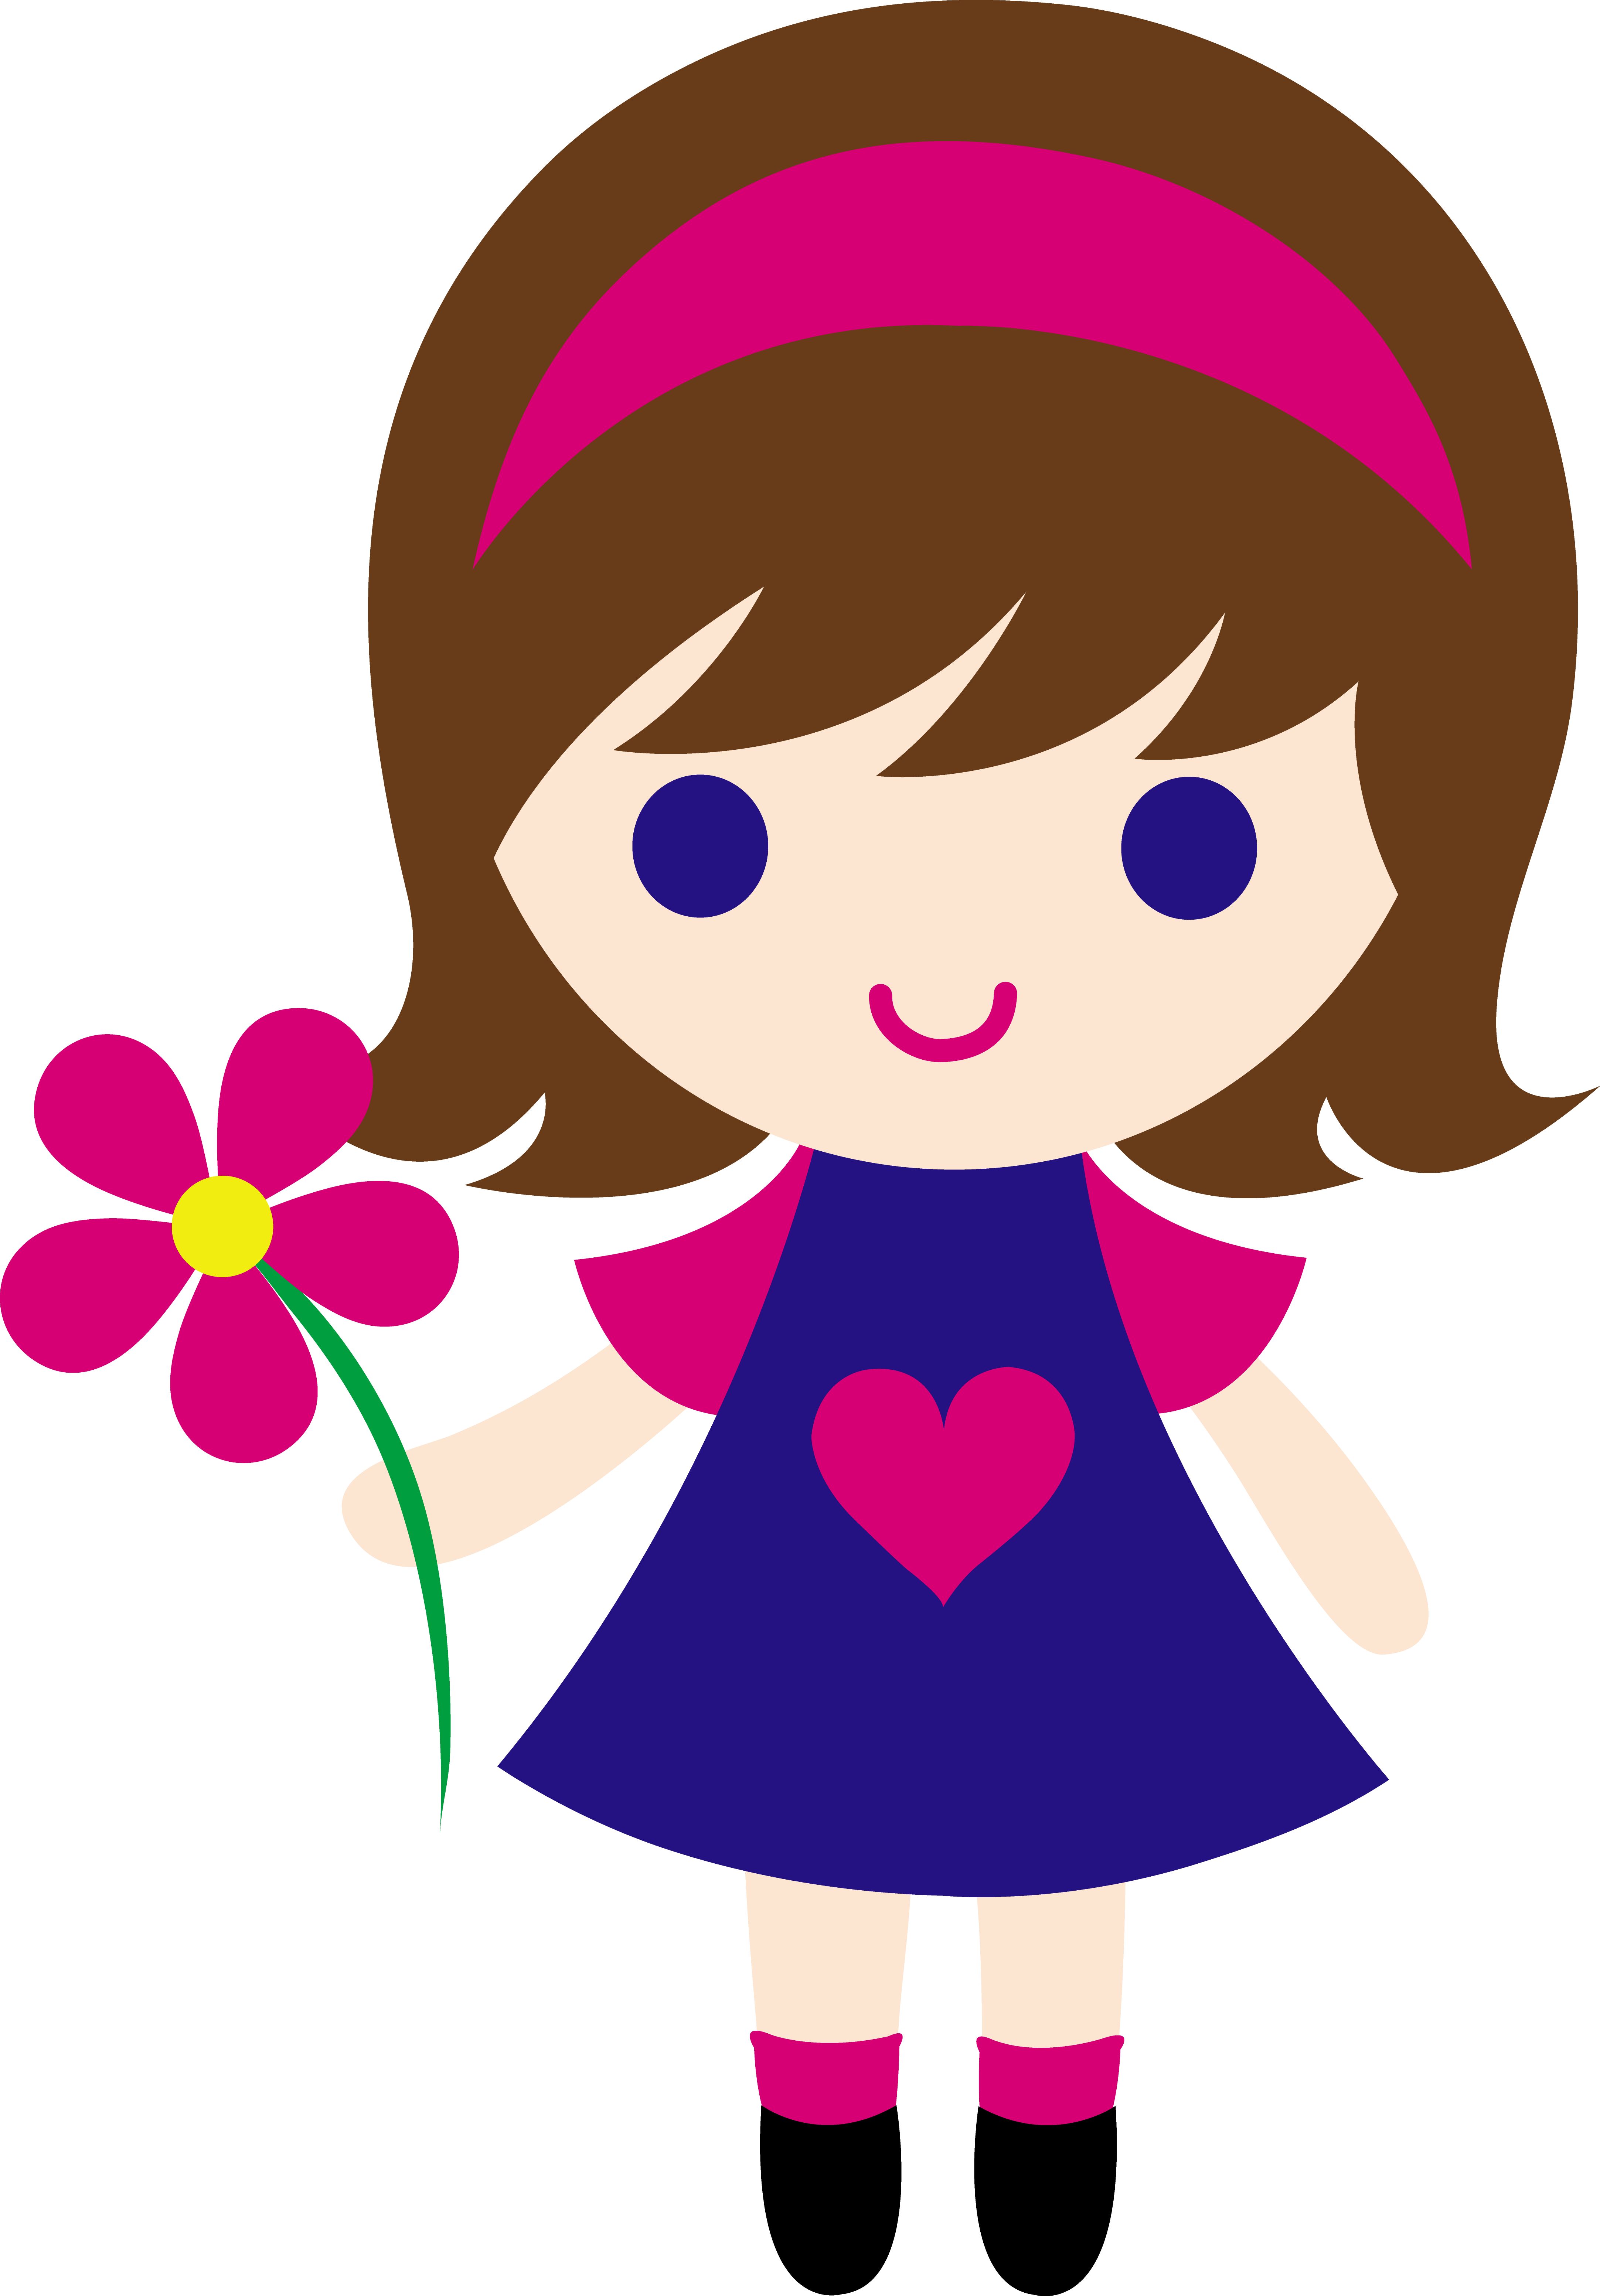 Free Girl Clipart